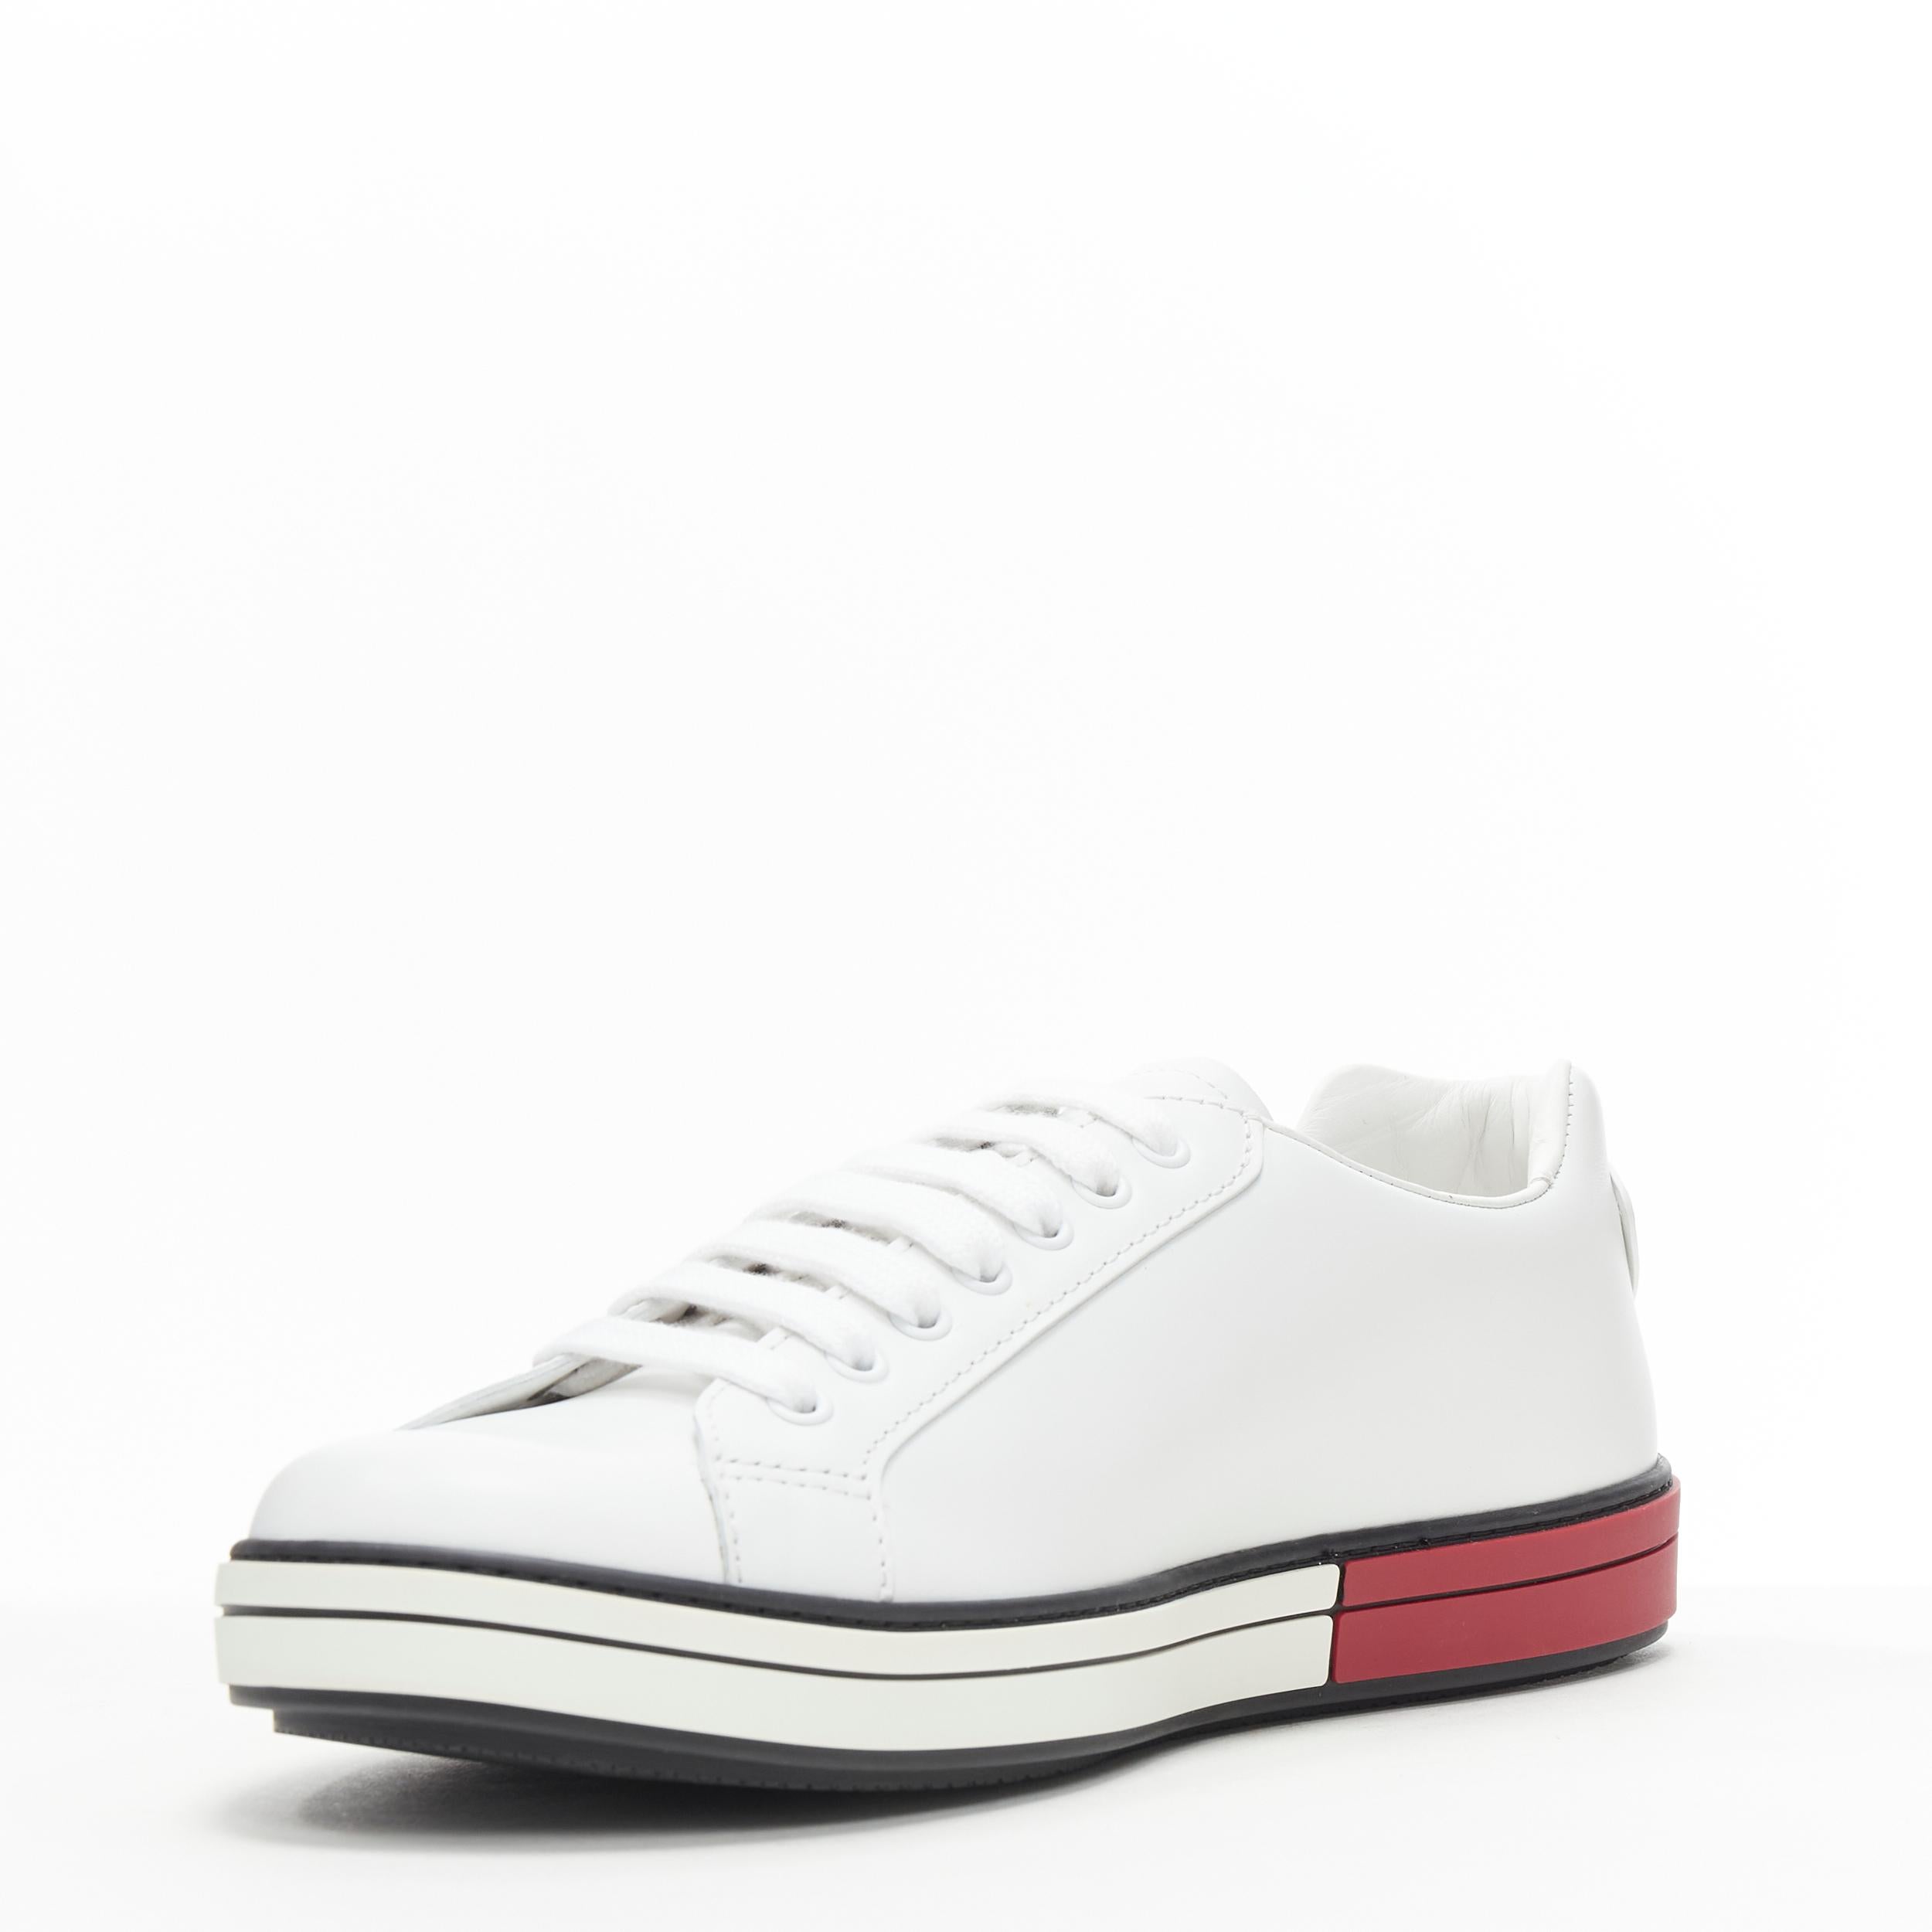 red and white prada shoes